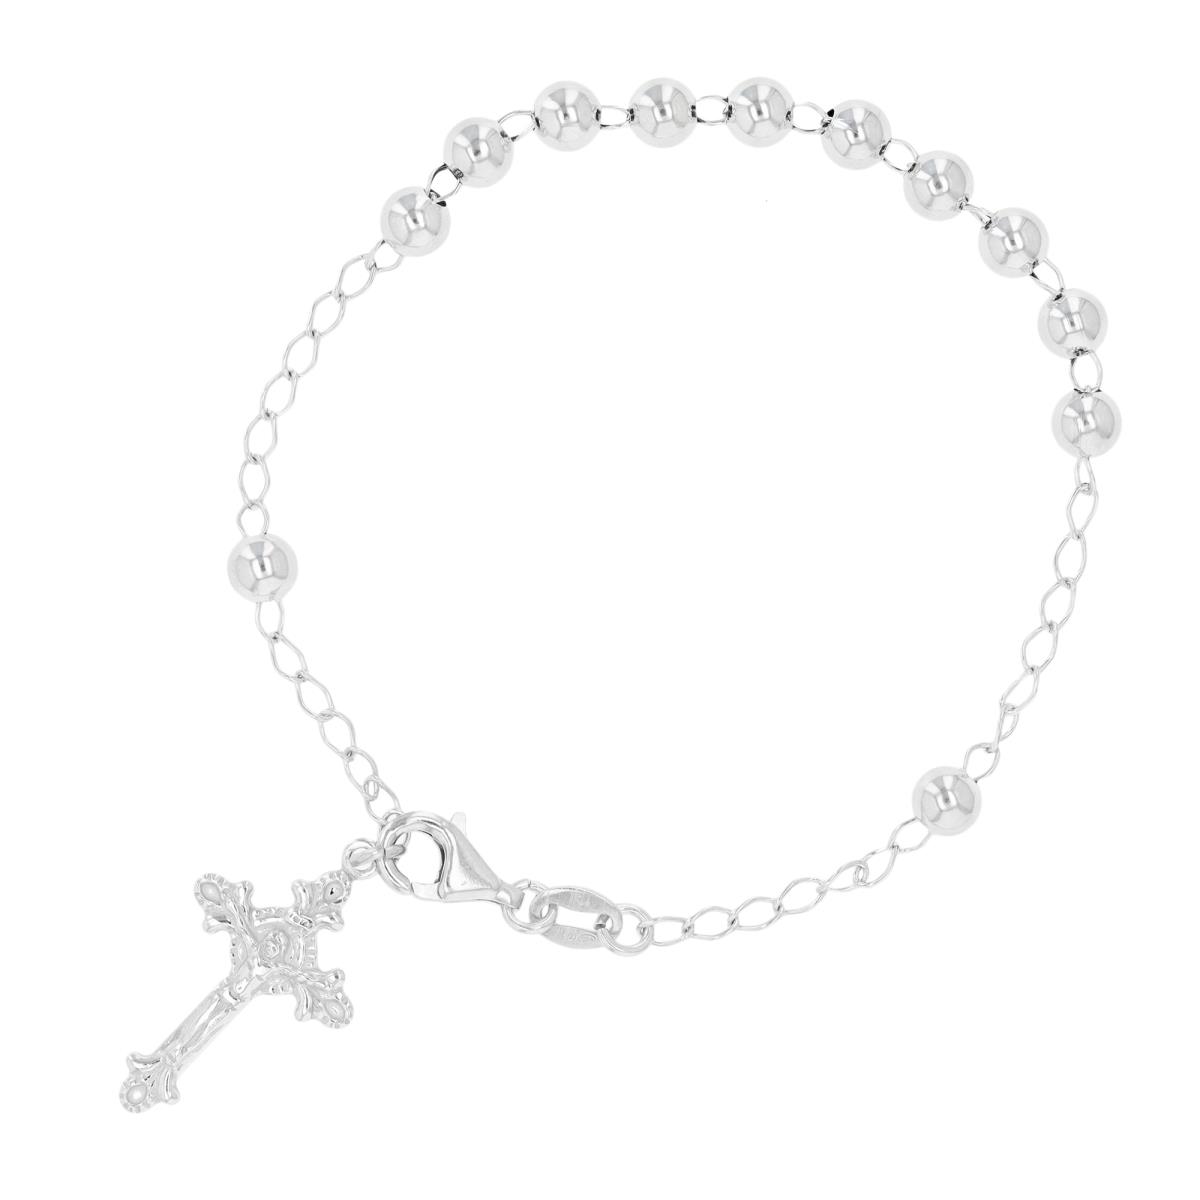 Sterling Silver Rhodium 25x15mm Crucifix Charm & Beads on Chain 7.5"Rosary Bracelet